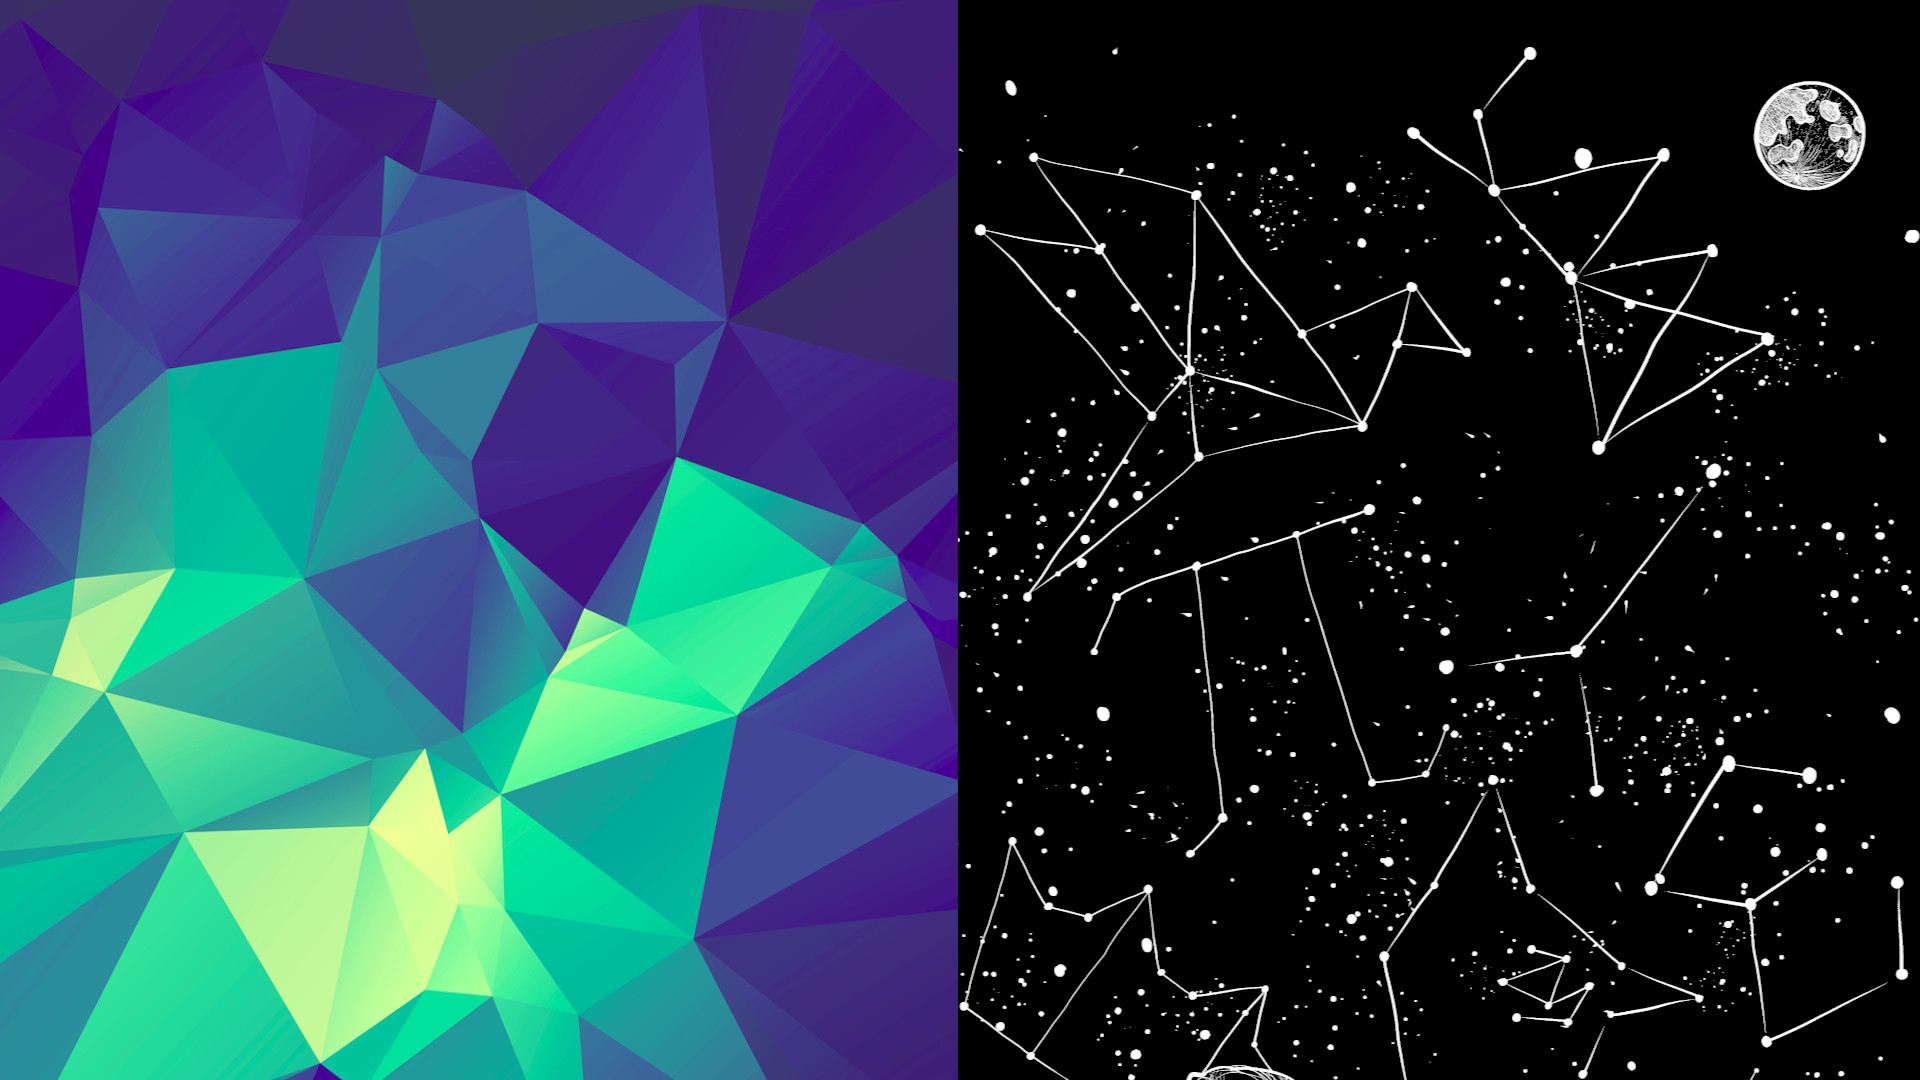 Old triangular background and top of the “Constellations” T-Shirt